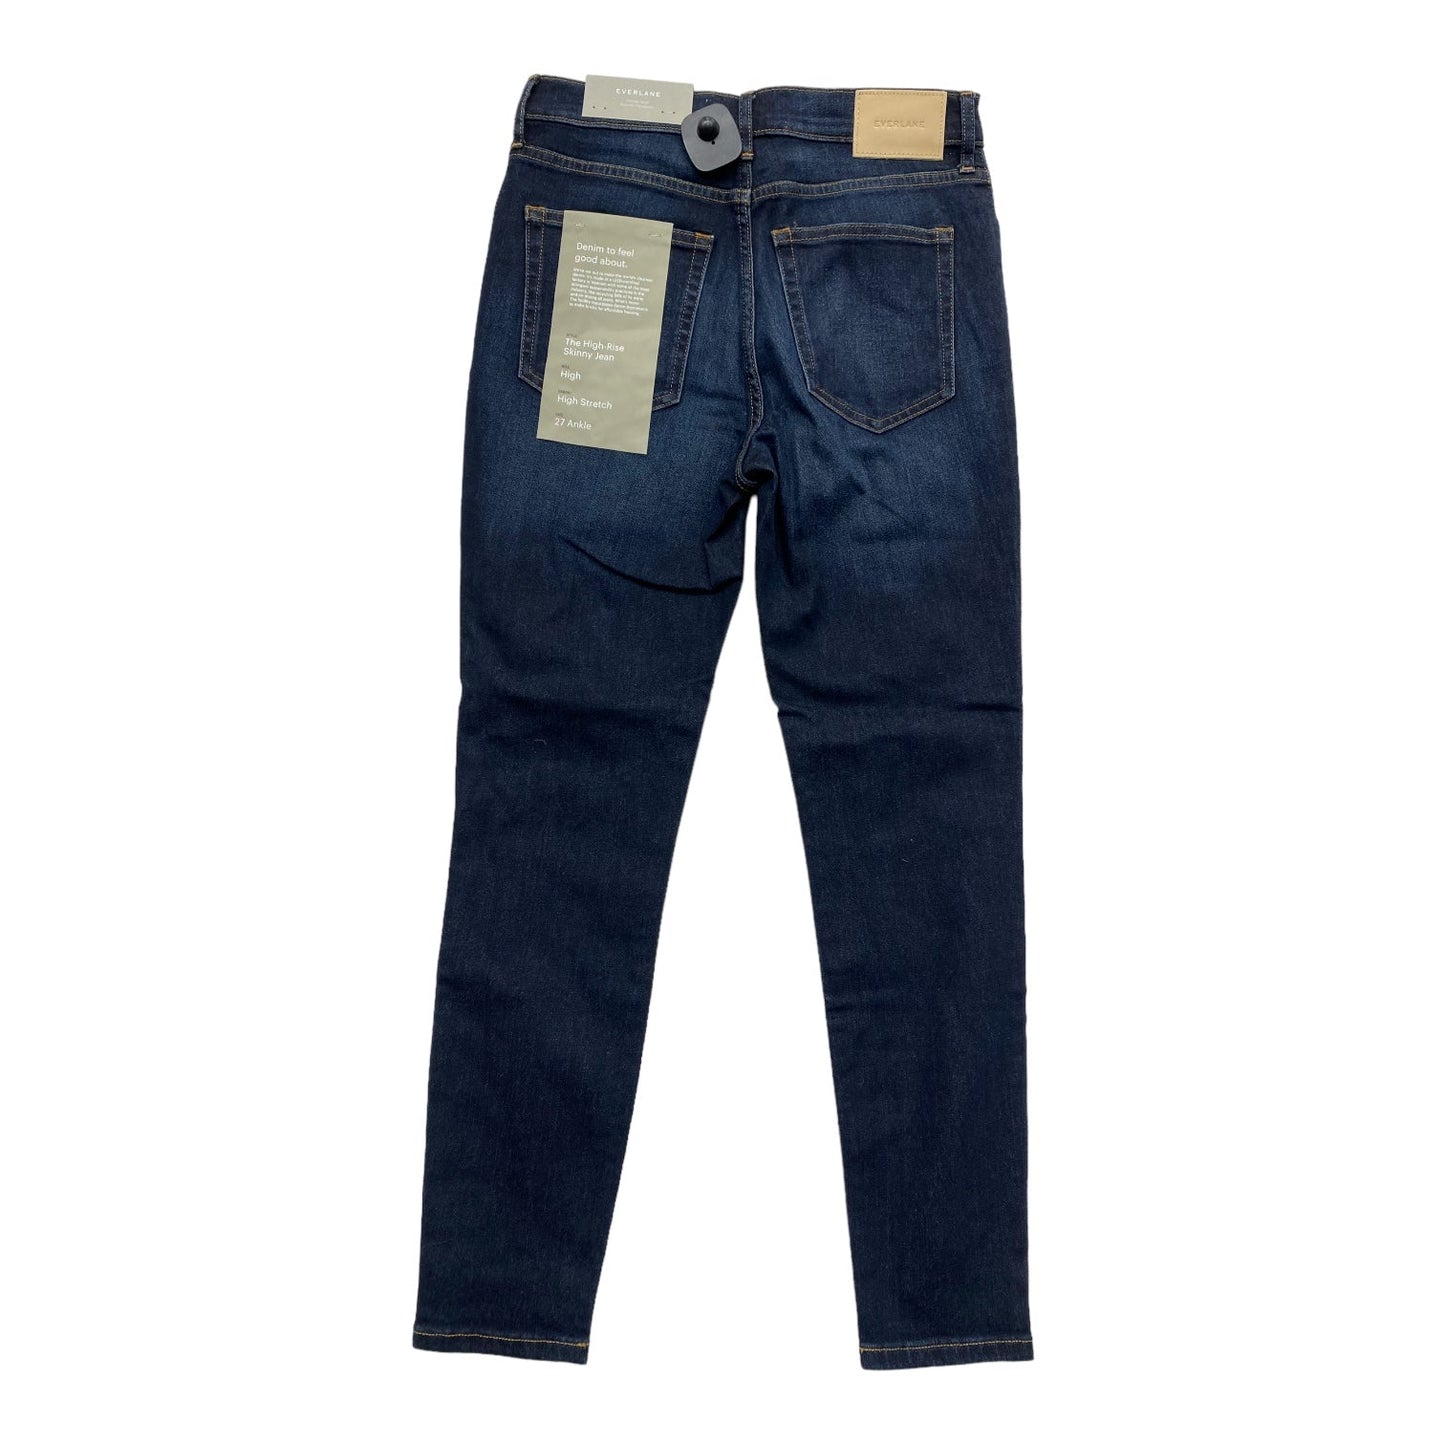 Jeans Skinny By Everlane  Size: 4